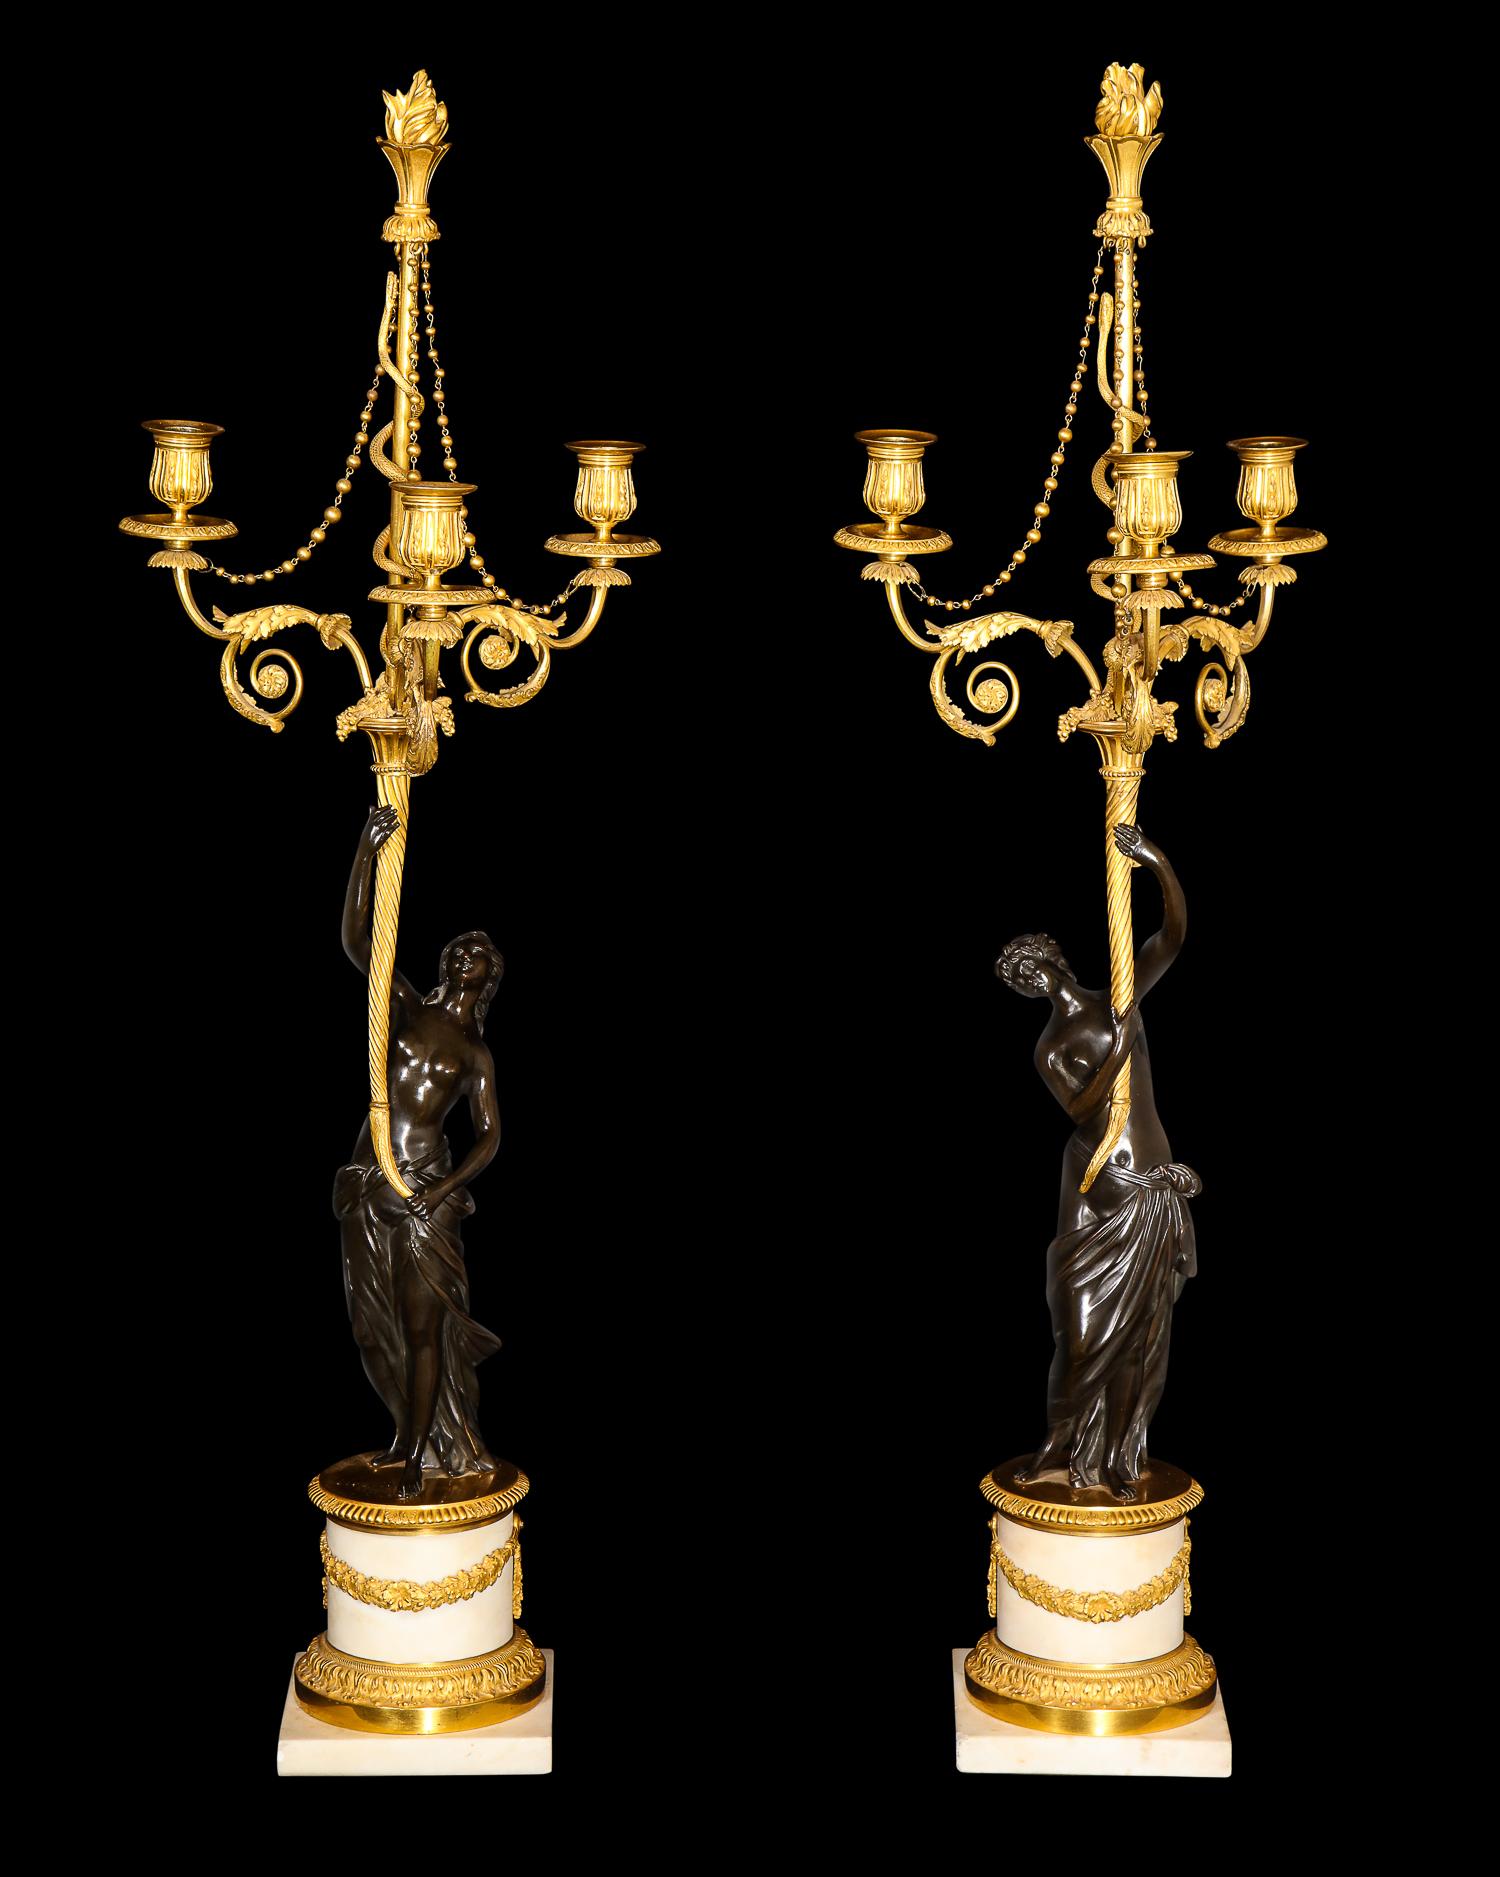 A pair of magnificent large antique French Louis XVI Figural three-arm gilt bronze, patina bronze and white marble candelabras of superb quality embellished with patinated bronze figures of neoclassical ladies rested on white gilt bronze mounted